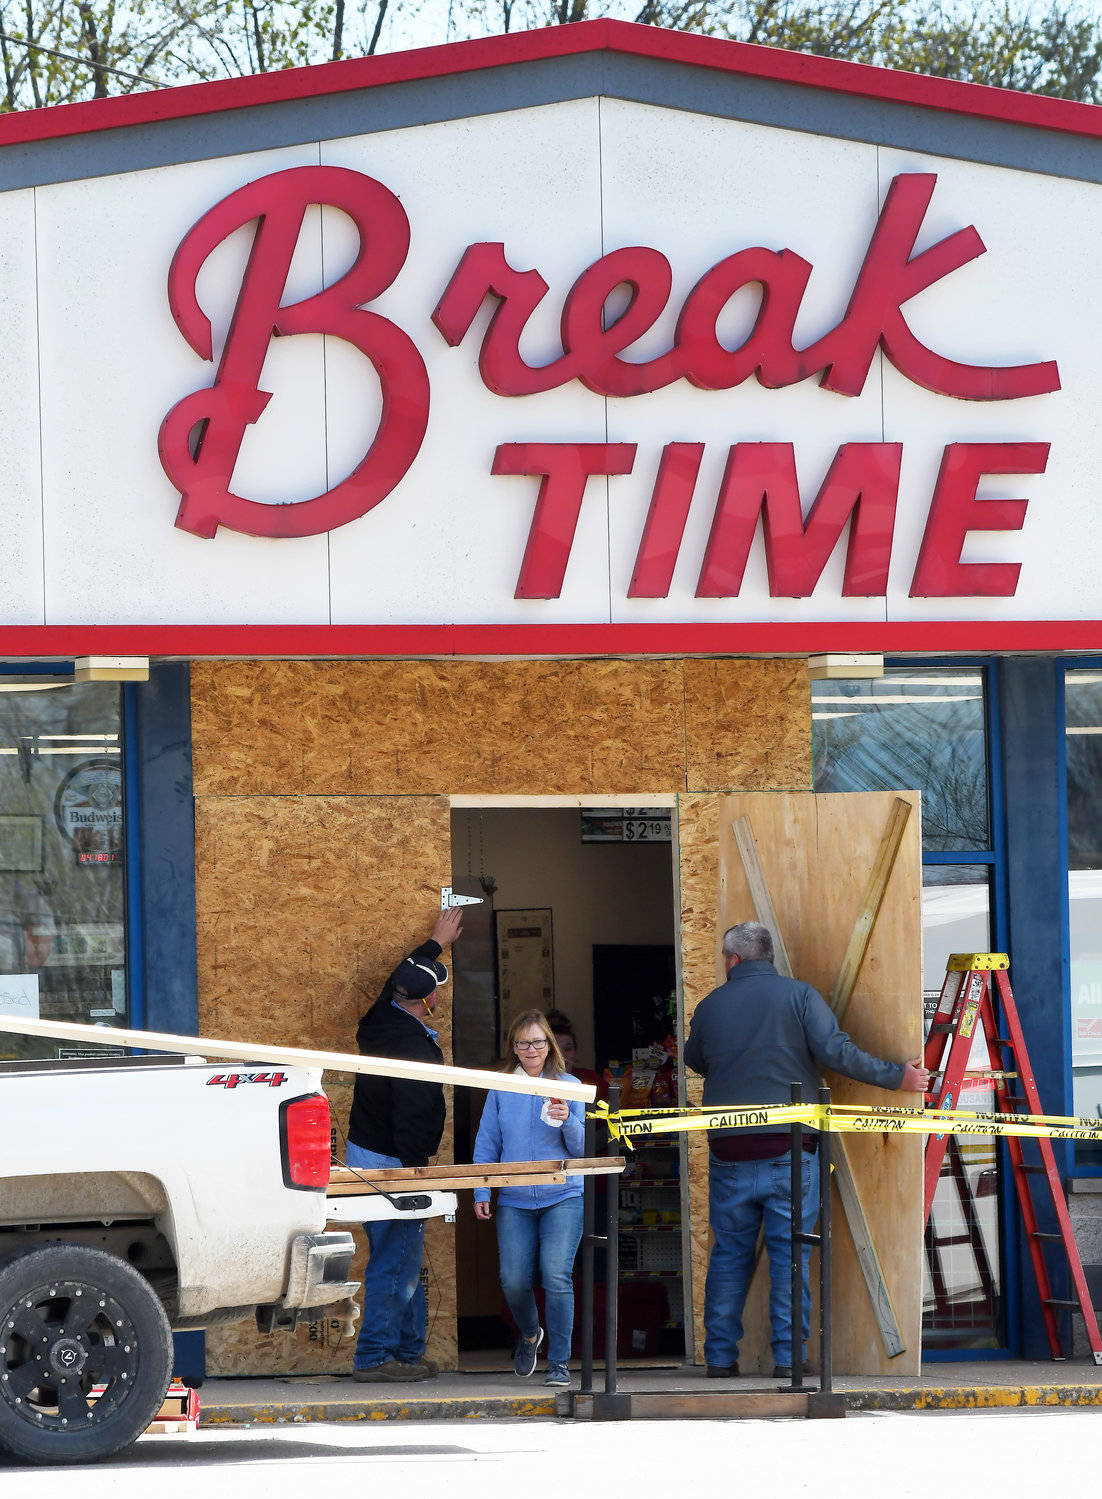 A CUSTOMER exits Break Time on Monday as MFA maintenance employees from Columbia install a temporary front door to the building damaged Sunday evening by a motorist’s car.